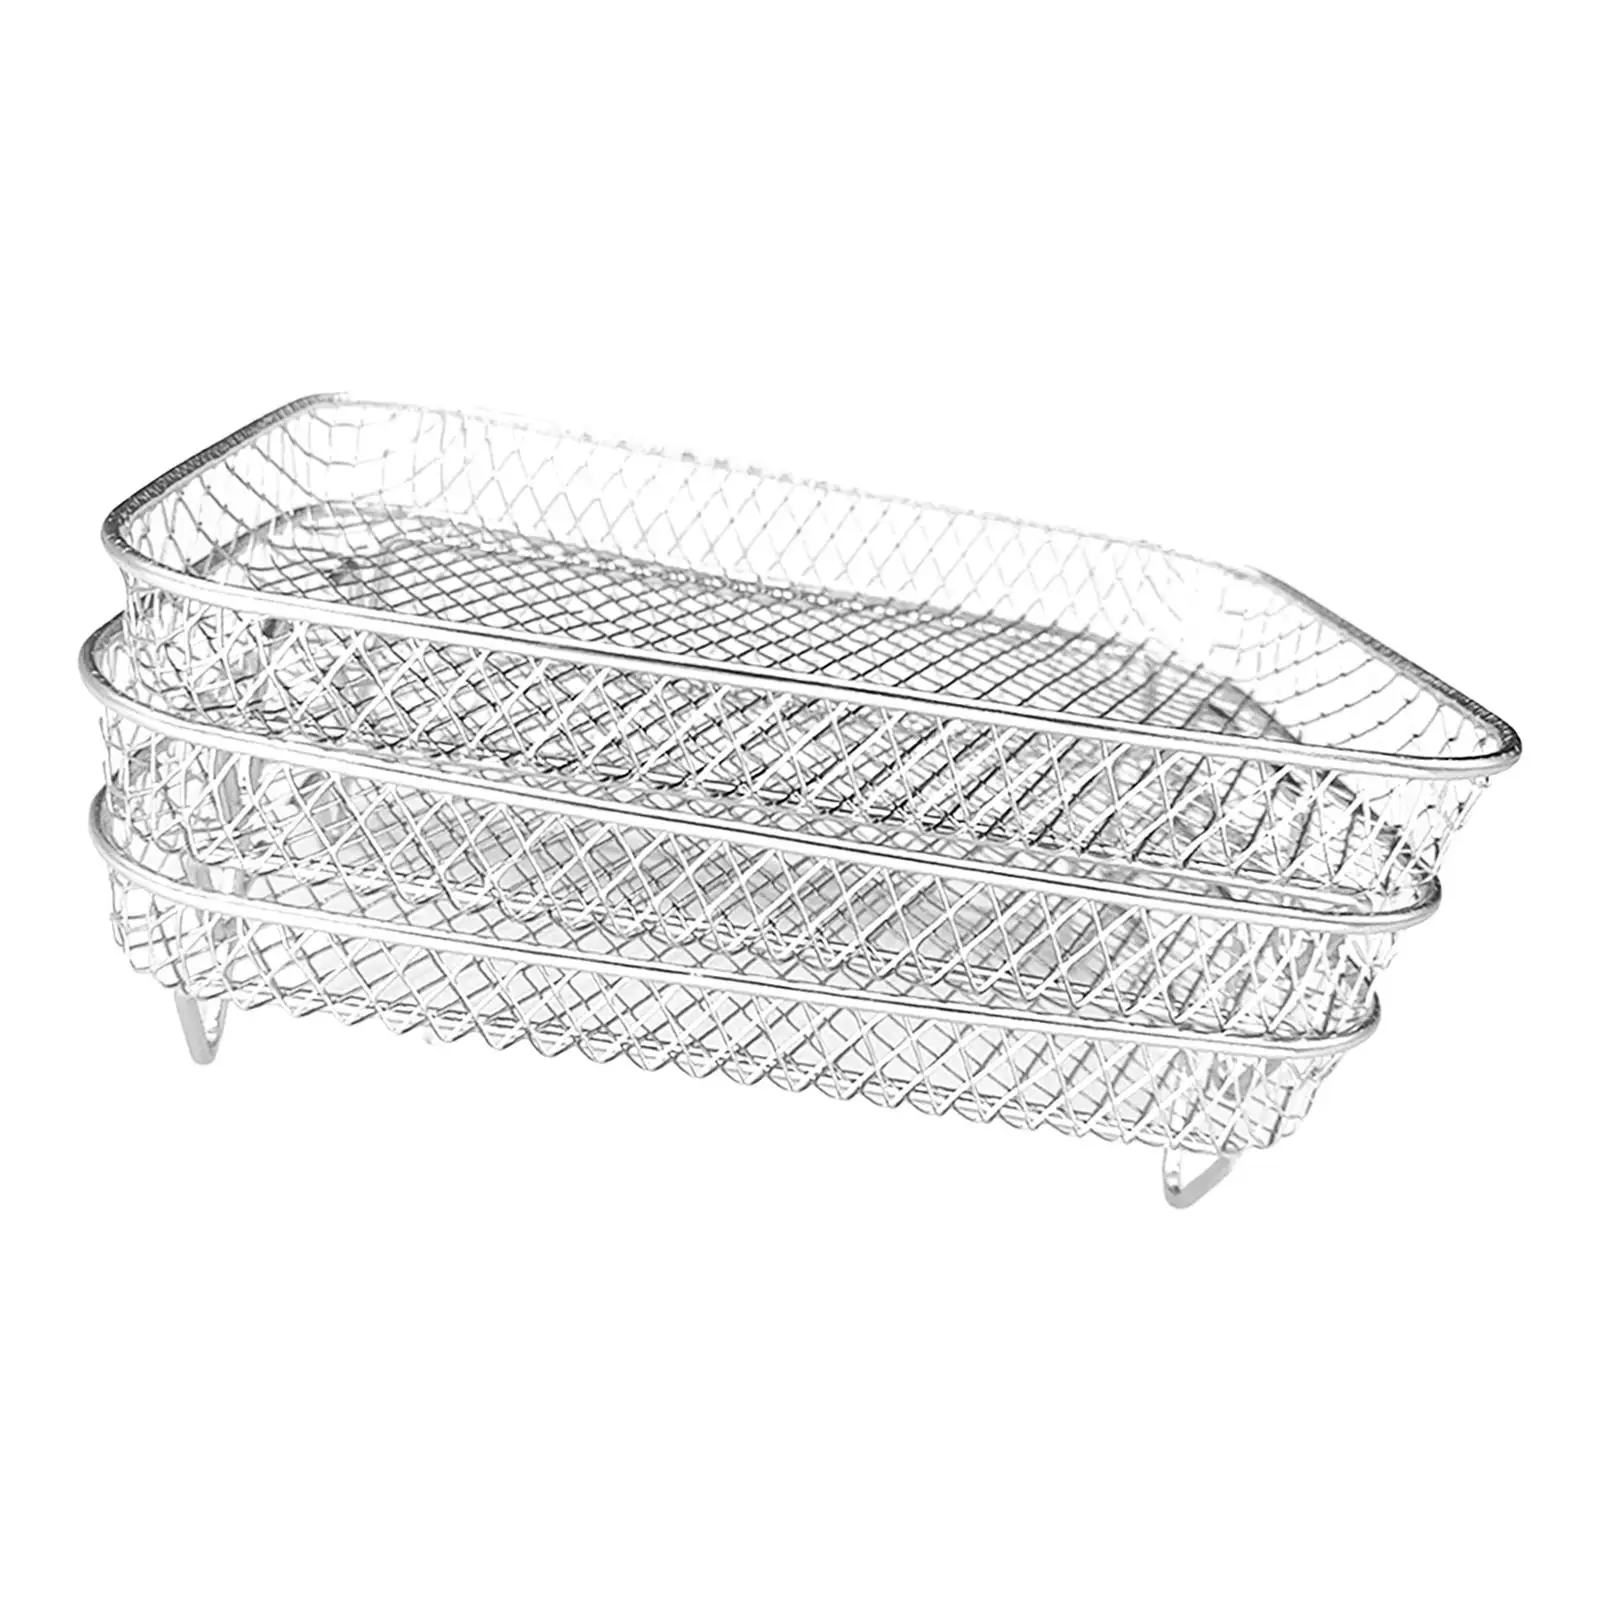 Stainless Steel Air Fryer Rack 3 Layer Support for Air Fryer Easy Clean Dehydrator Rack Grill Rack